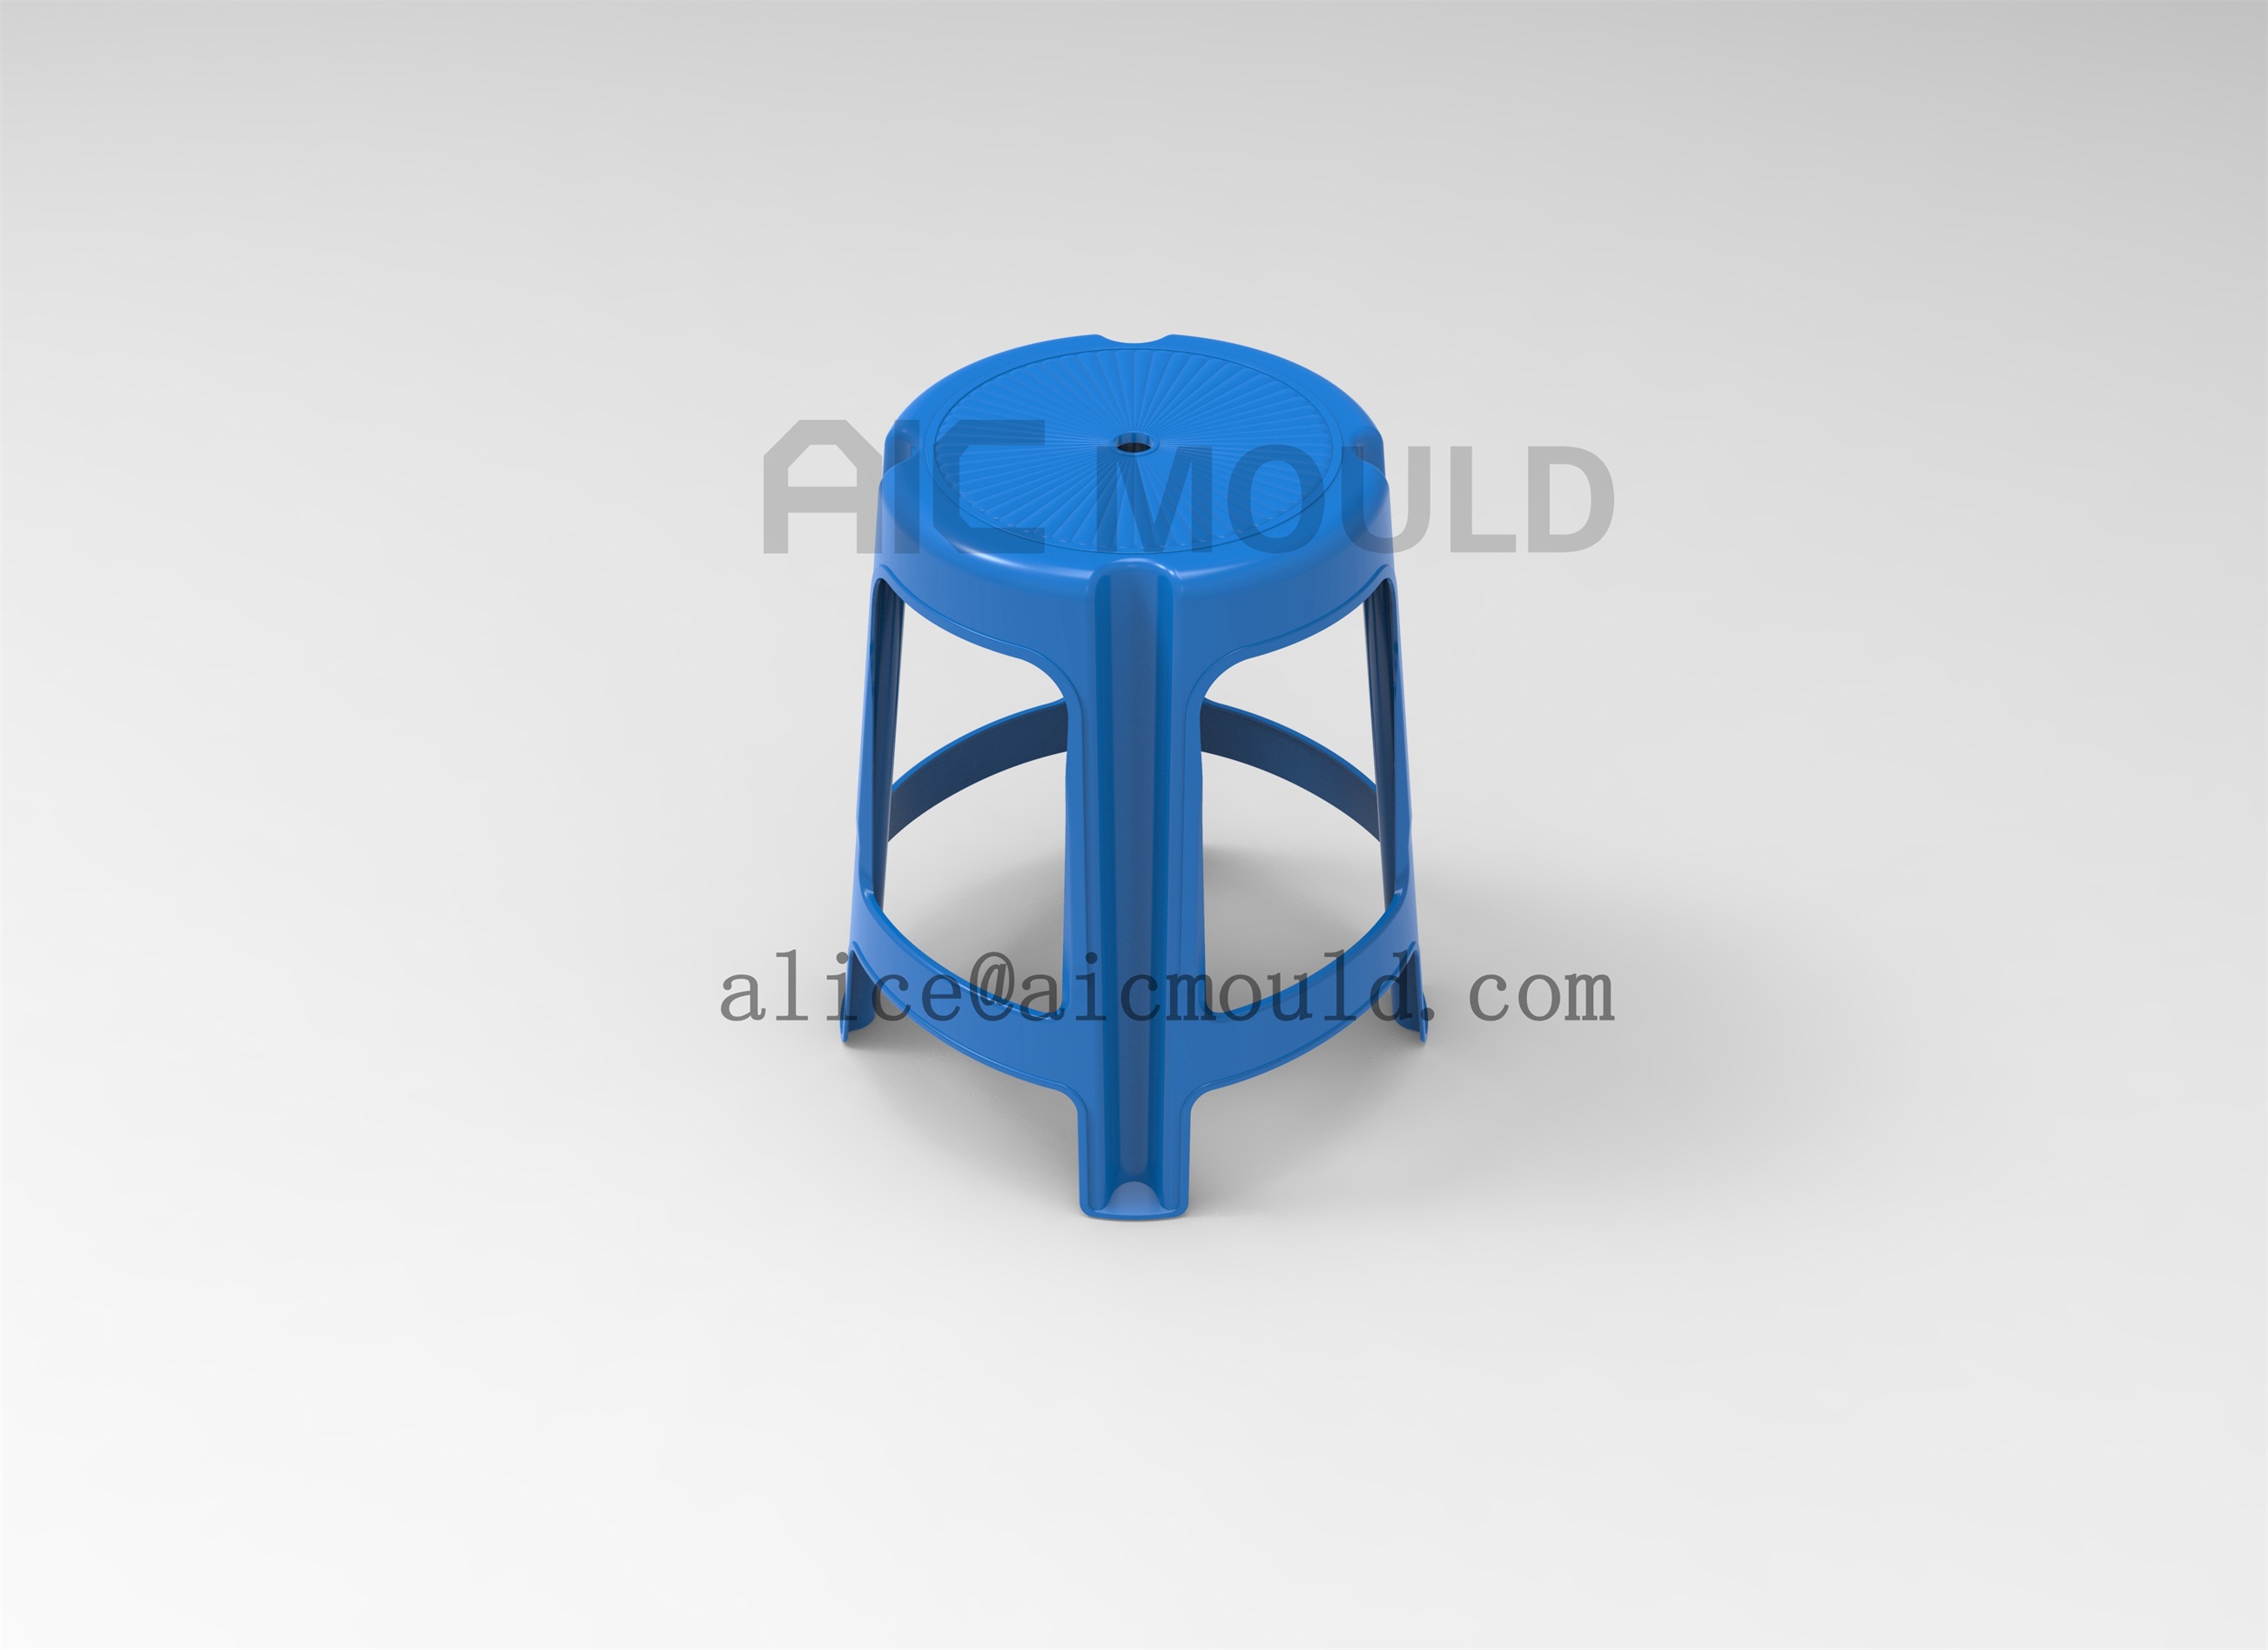 china plastic stool mould supplier